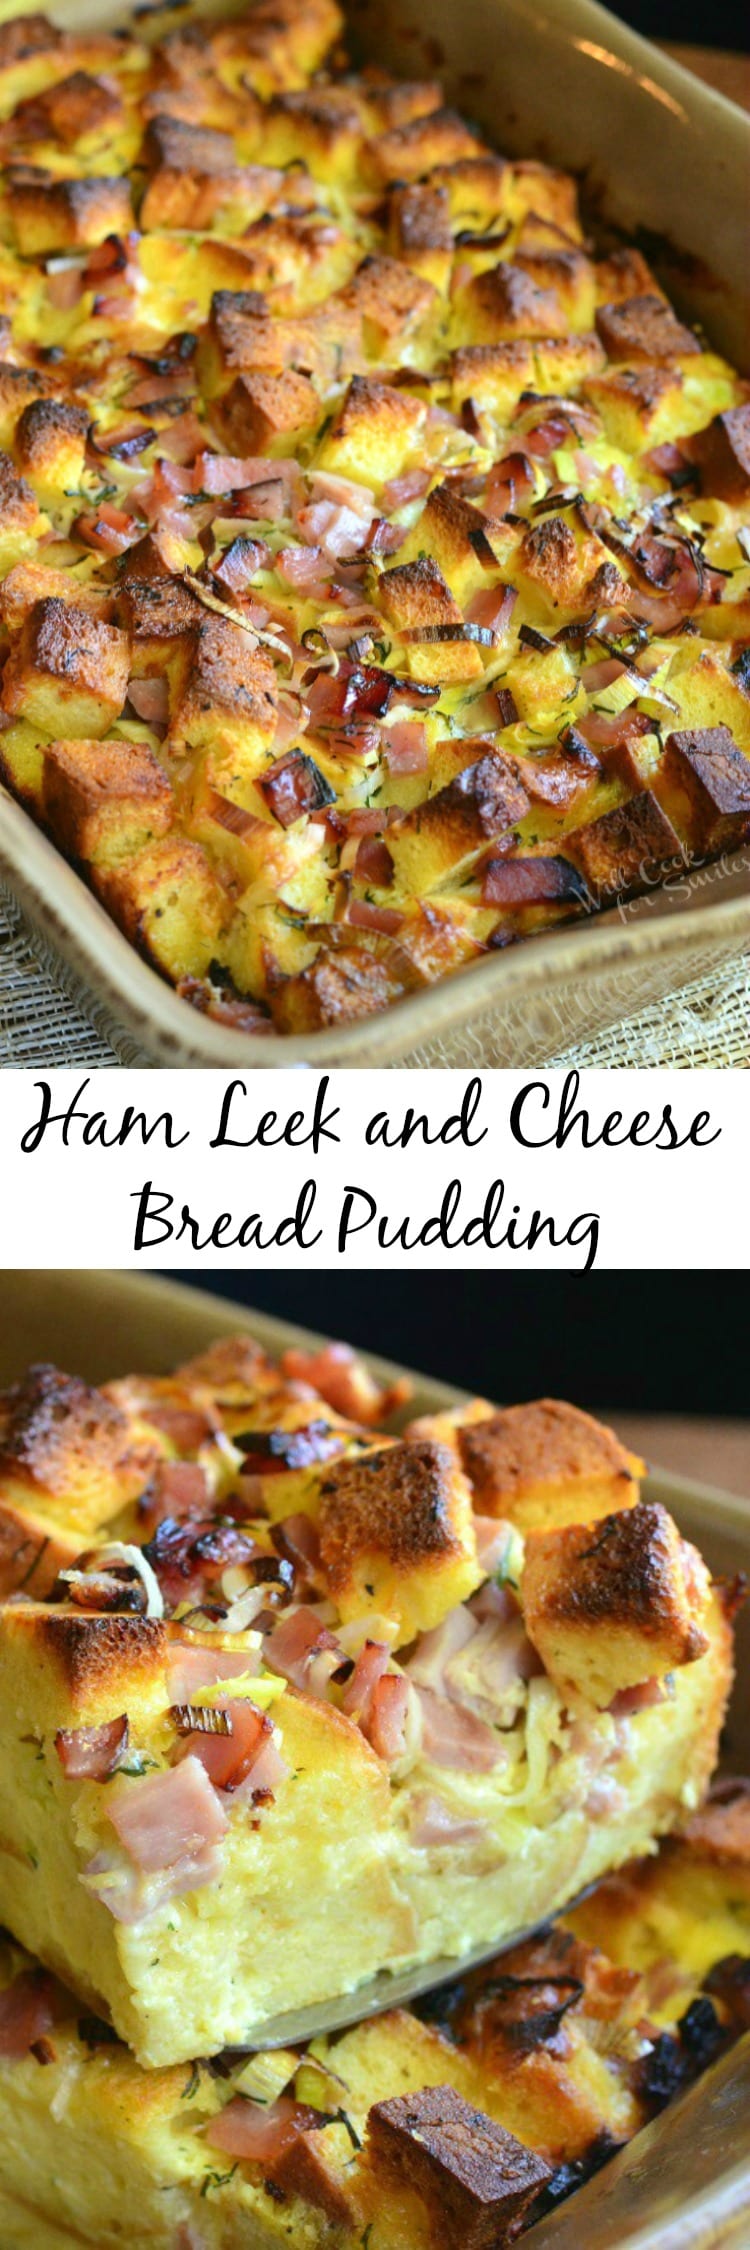 top photo Ham Leek and Cheese Bread Pudding in a baking pan with a spatula bottom photo Ham Leek and Cheese Bread Pudding being lifted out of a baking pan with a spatula 